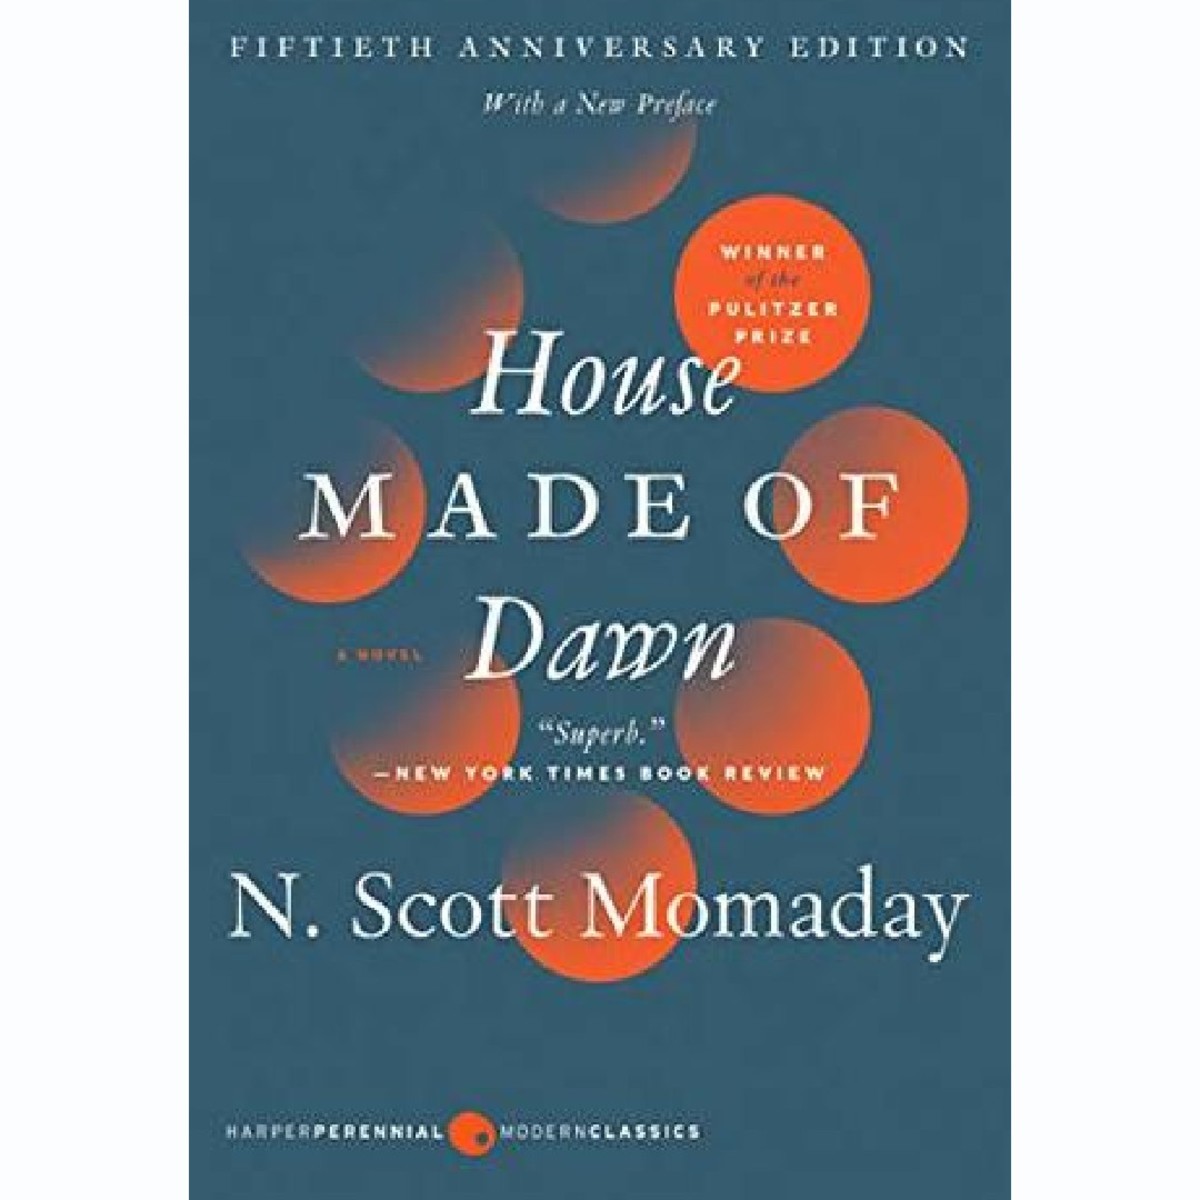 'House Made of Dawn' by N. Scott Momaday